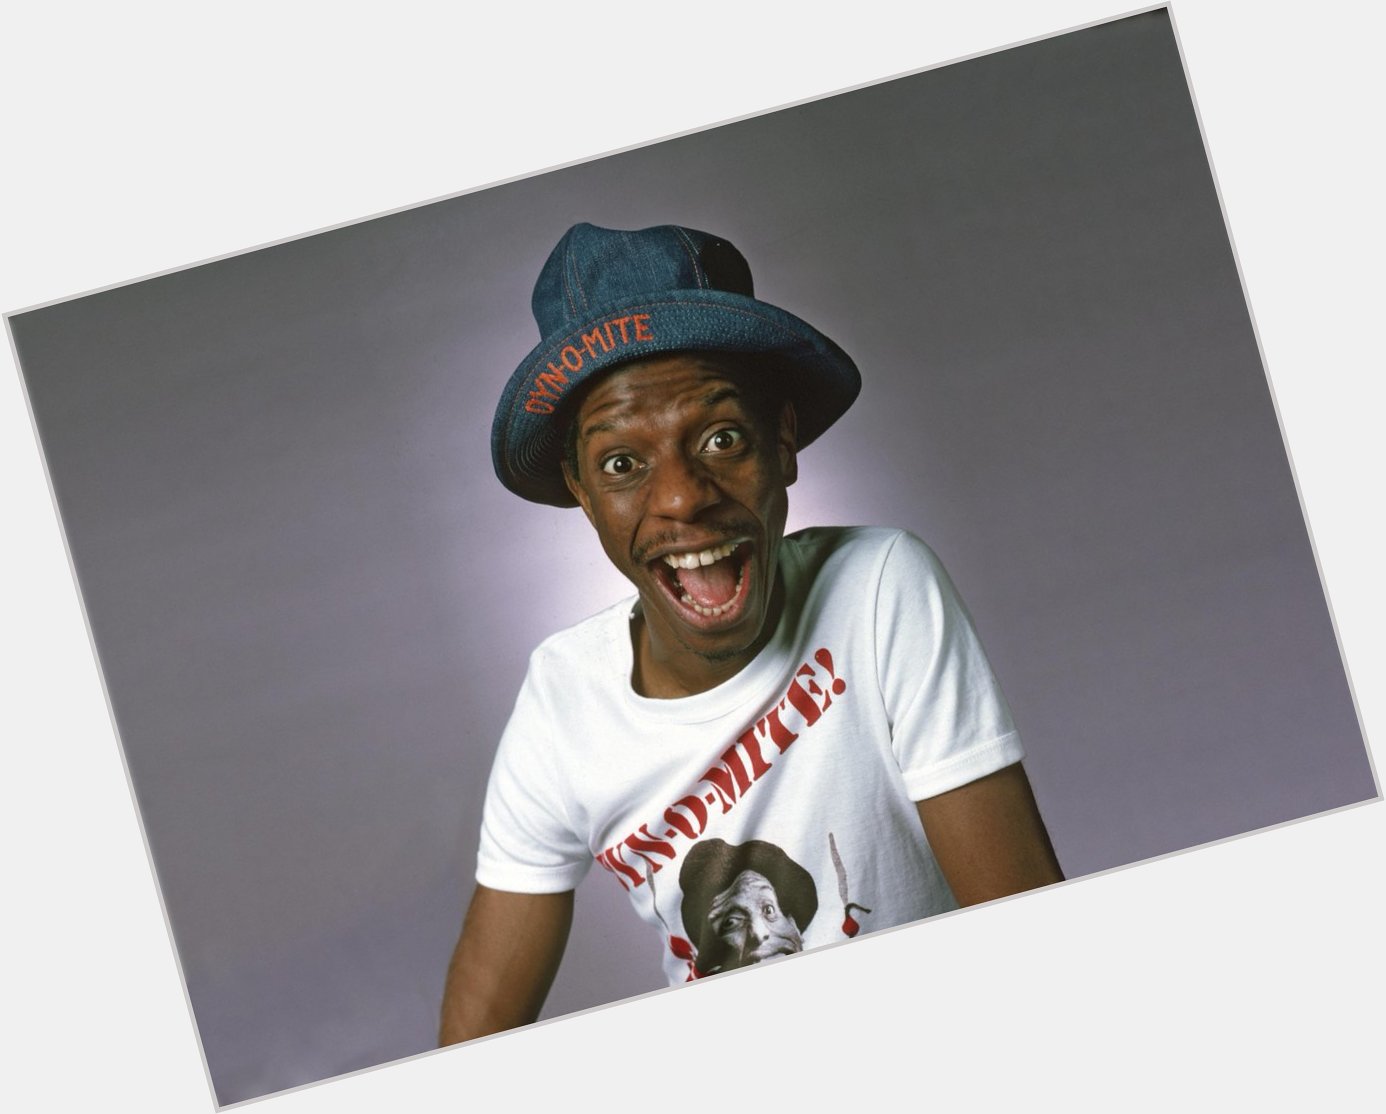 Happy Birthday to Jimmie Walker, who turns 68 today! 